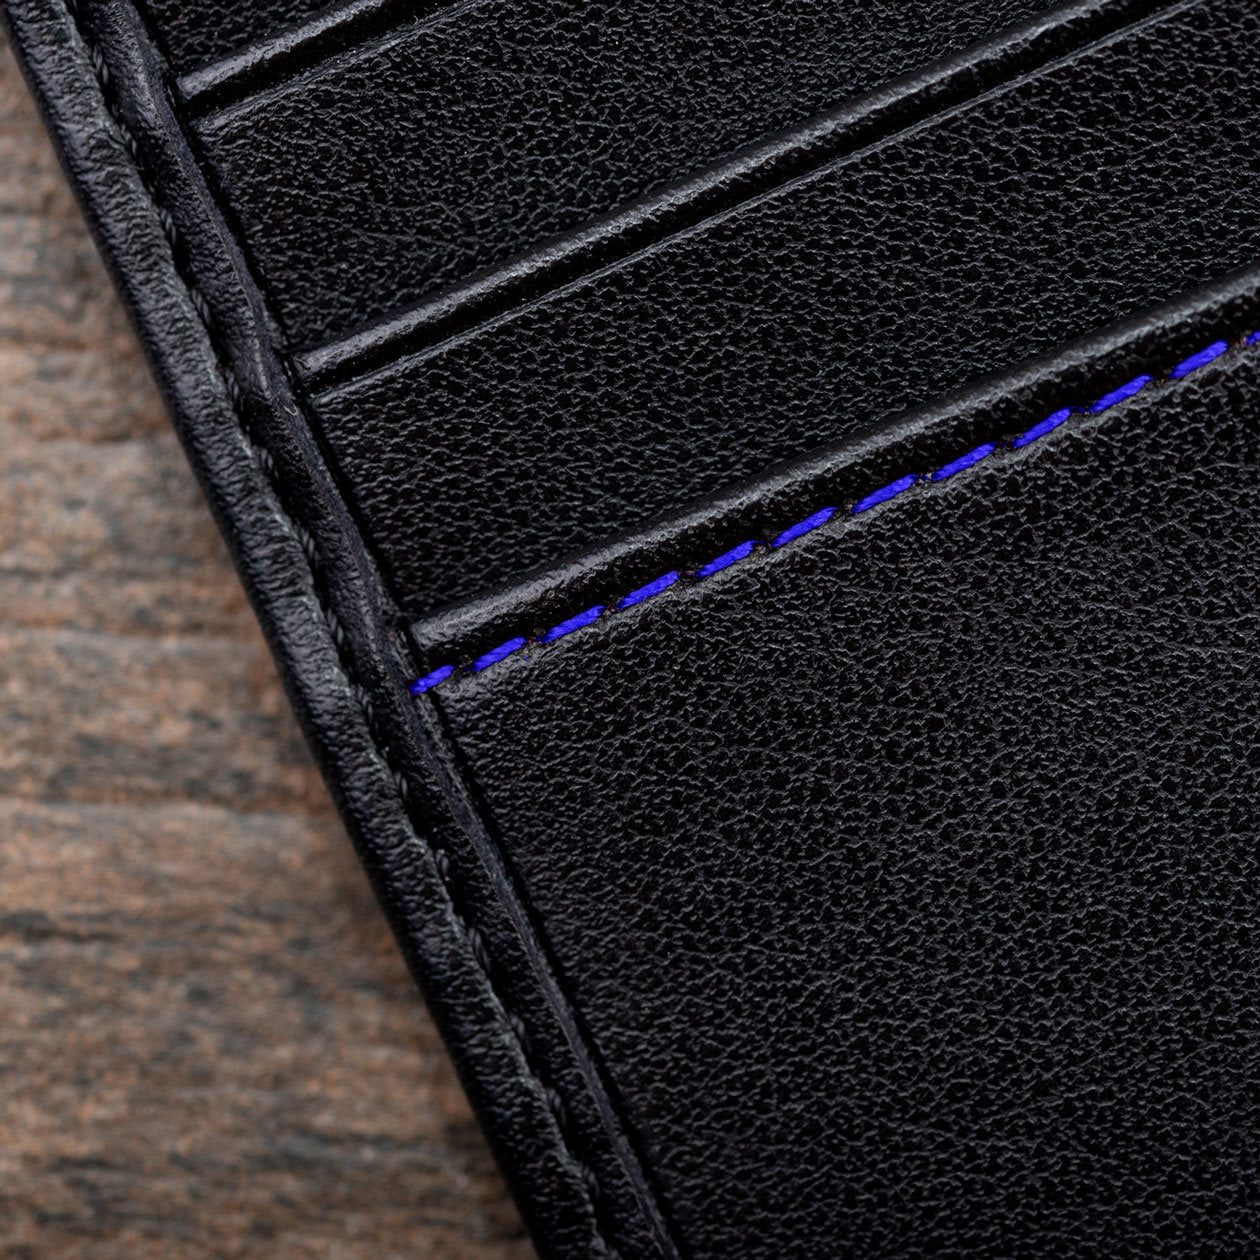 Bifold Vegan Corn Leather Wallet with Coin Pocket - Black with Cobalt